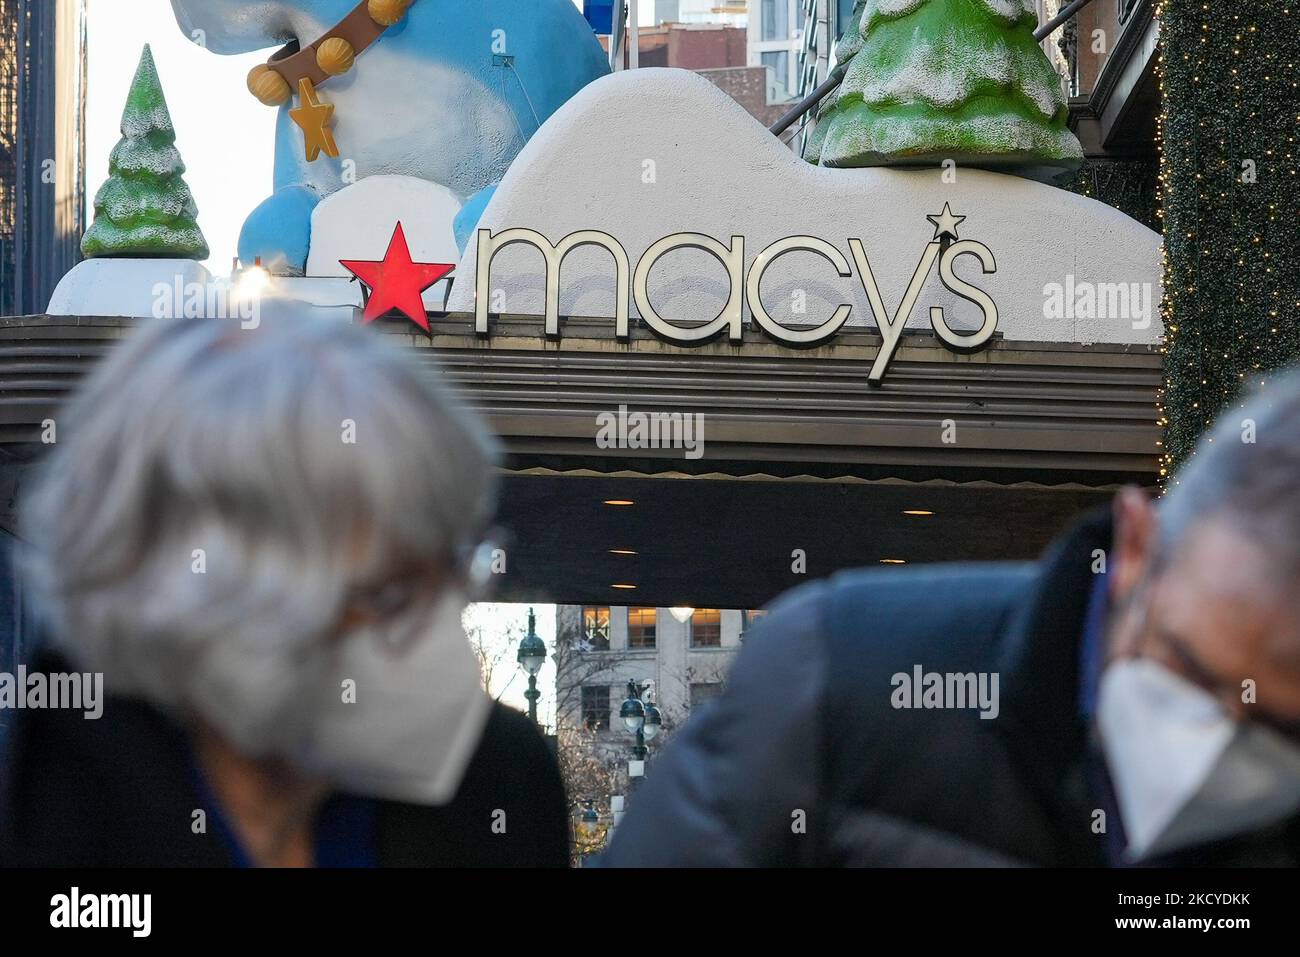 Pedestrians view the holiday windows at the Macy's Inc. flagship department store in the Herald Square area of New York, U.S., on Thursday, Dec. 23, 2021. U.S. retail sales strengthened from Nov. 3-23, rising 15.5% as an earlier holiday push, and concern over product shortages, may have pulled forward demand. (Photo by John Nacion/NurPhoto) Stock Photo